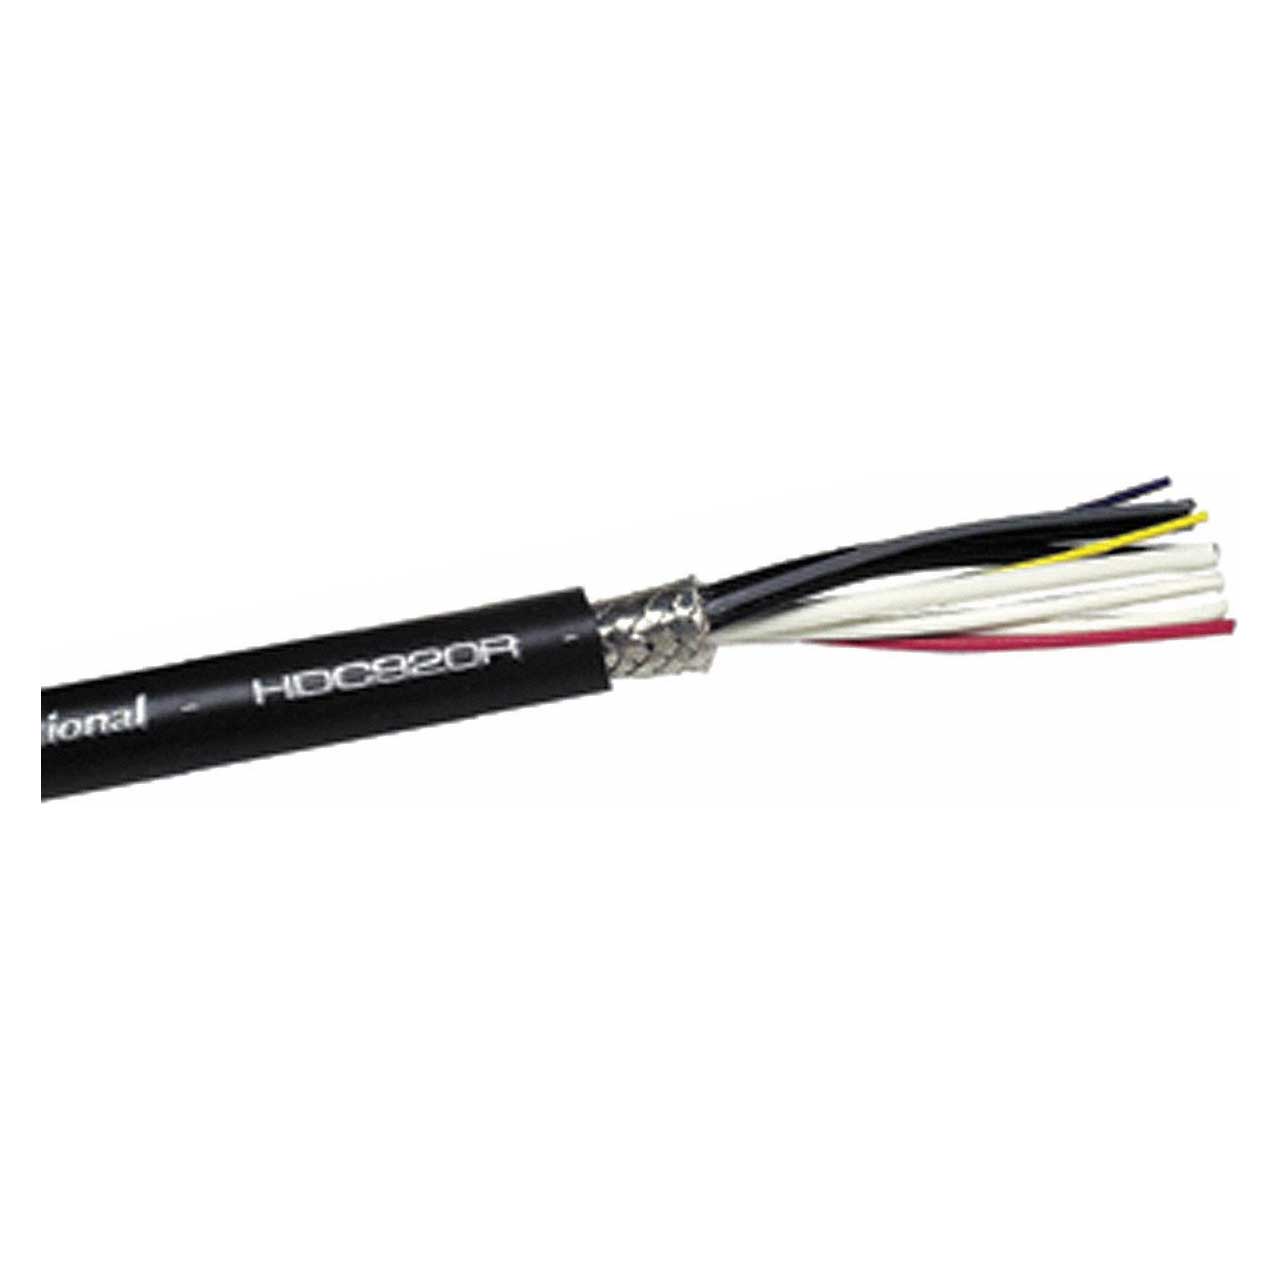 Gepco HDC920R SMPTE 311M Hybrid Fiber Optic Cable with Copper Conductors for Permanent Install - Per Foot  HDC920R.41